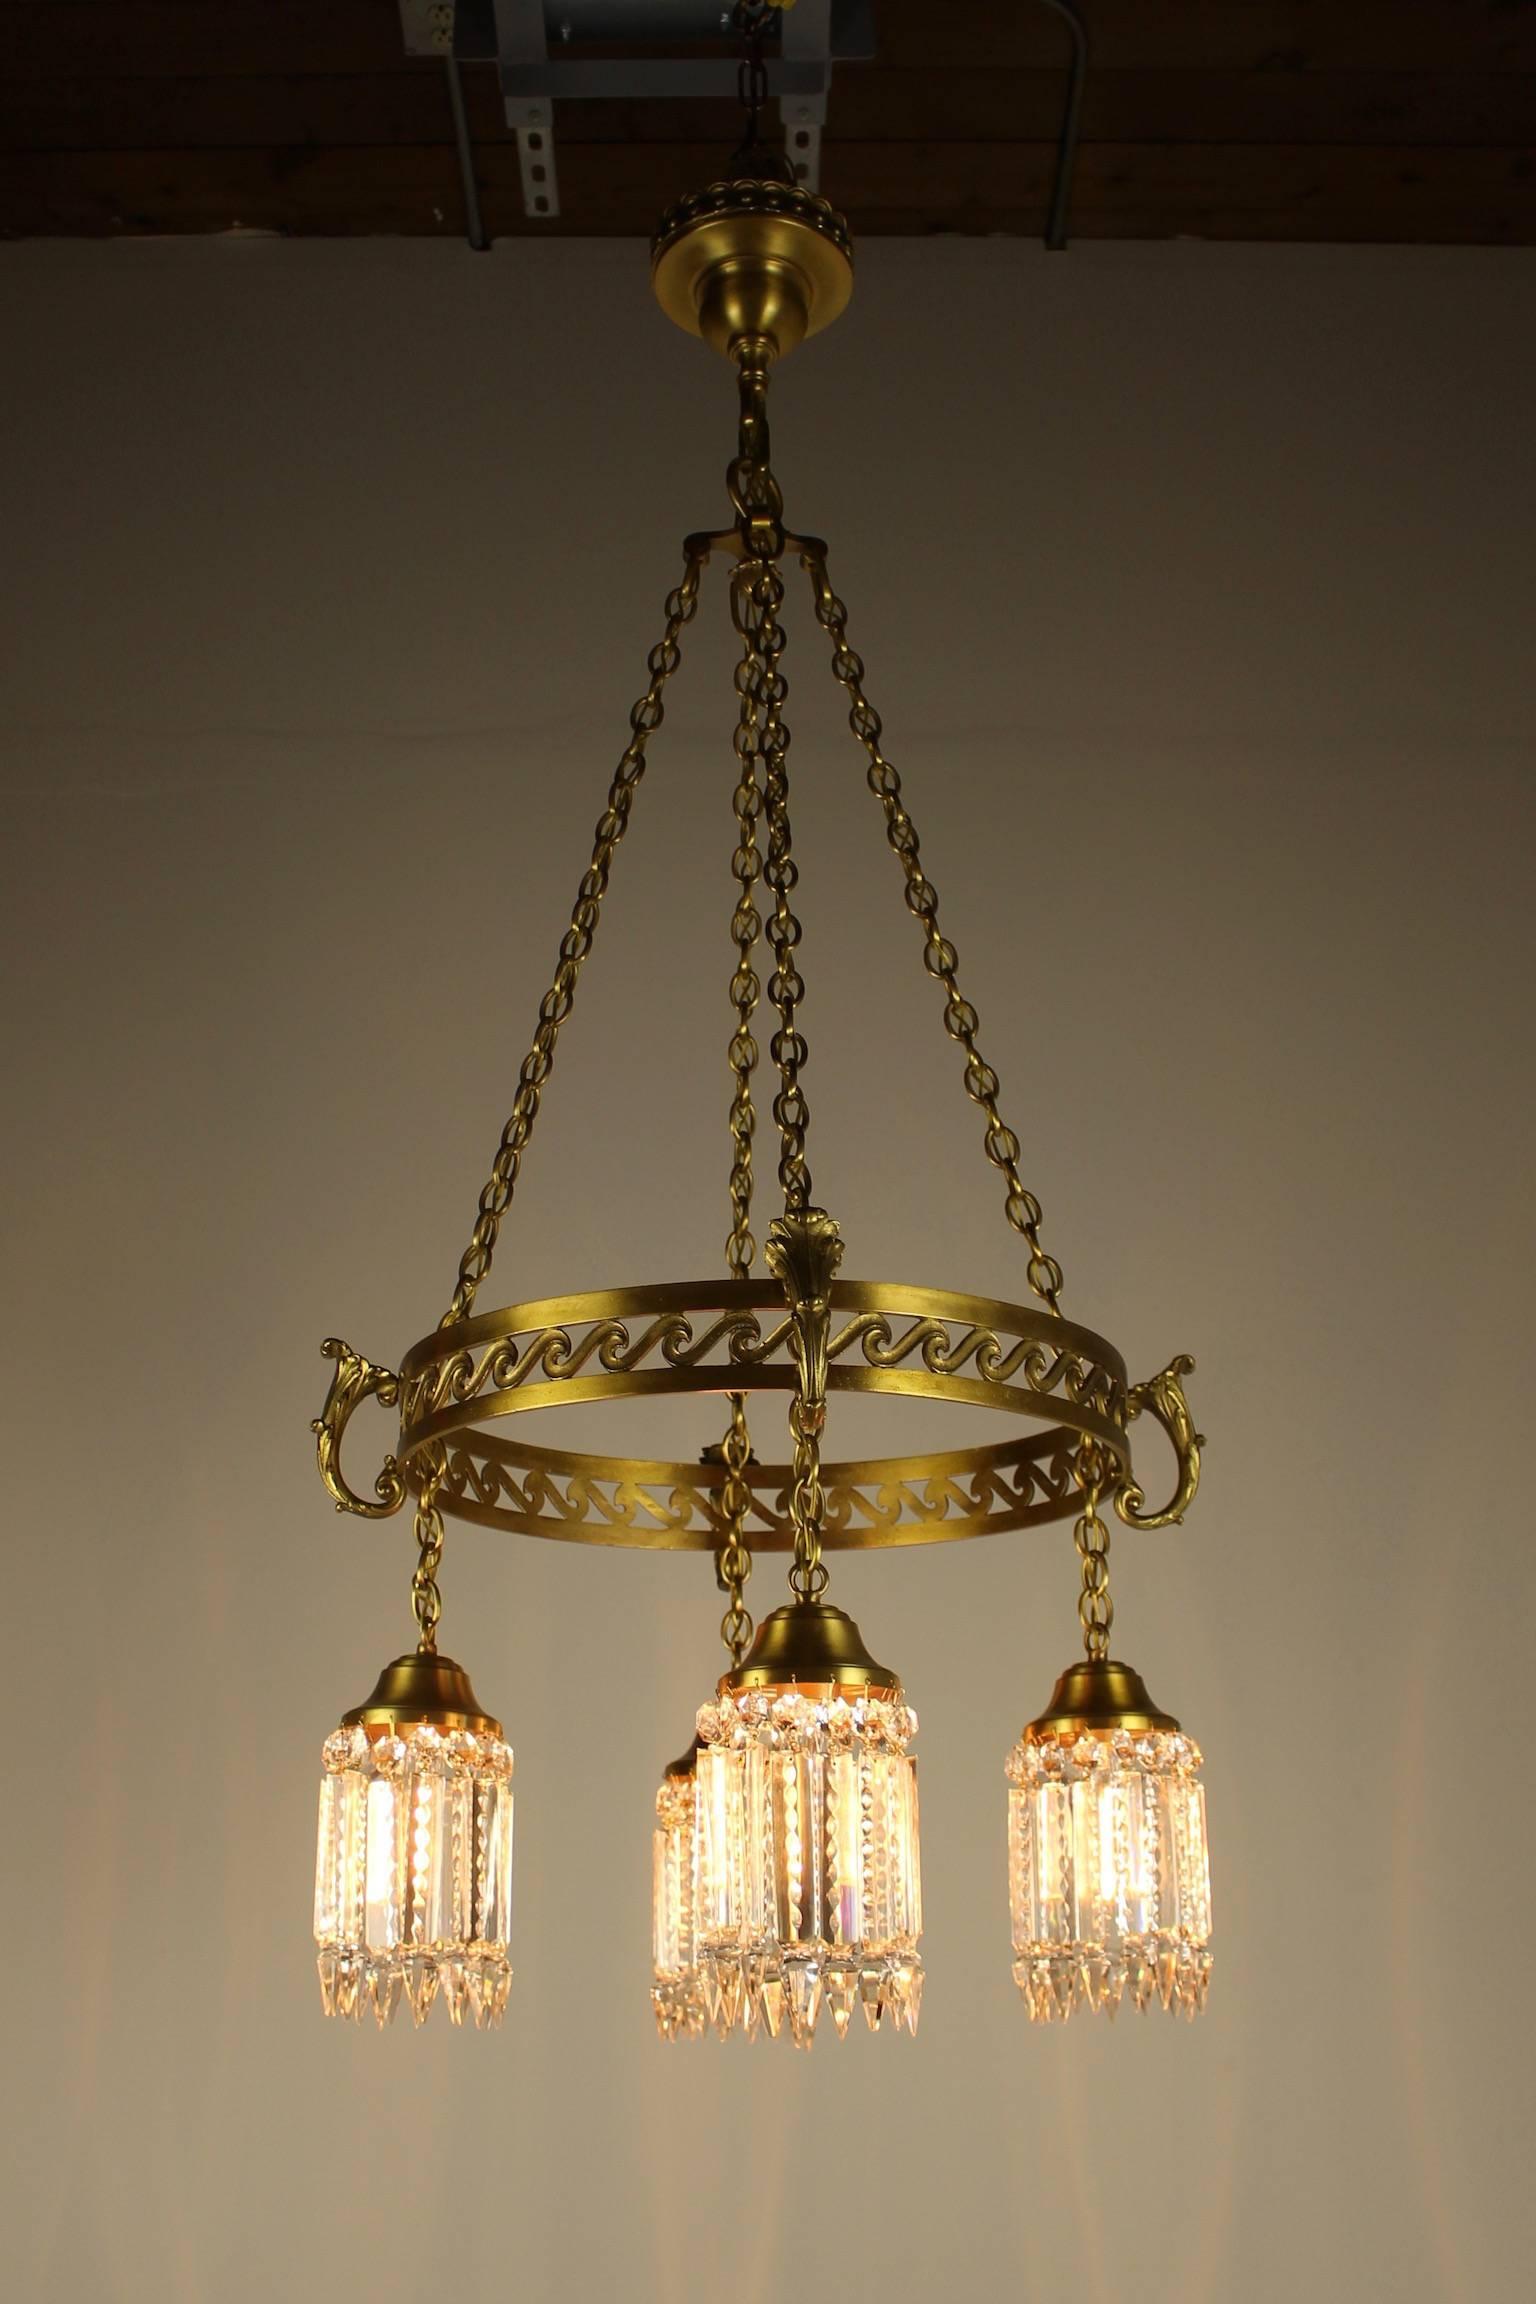 A beautiful and early example of the neoclassical style influencing early American lighting, circa 1905. This brass ring fixture is elegantly decorated with an 'S' curl motif with acanthus leaf appointments denoting every holder. This four-light